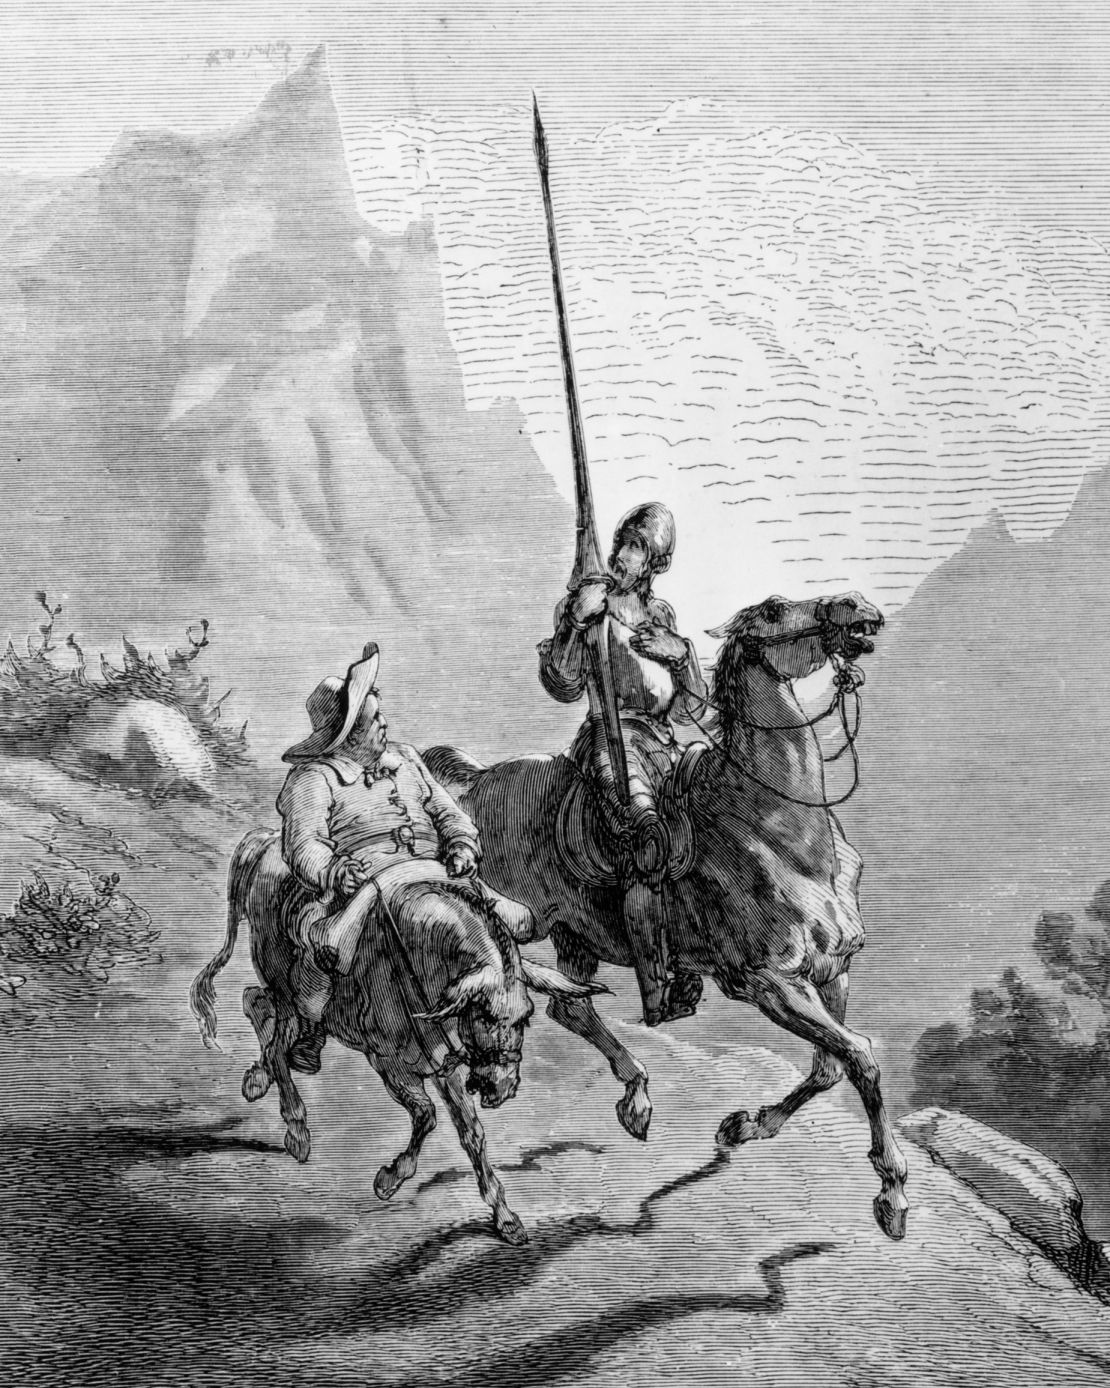 In Miguel de Cervantes' "Don Quixote," Don Quixote and Sancho Panza discussed counting goats — not sheep — to help Quixote sleep.